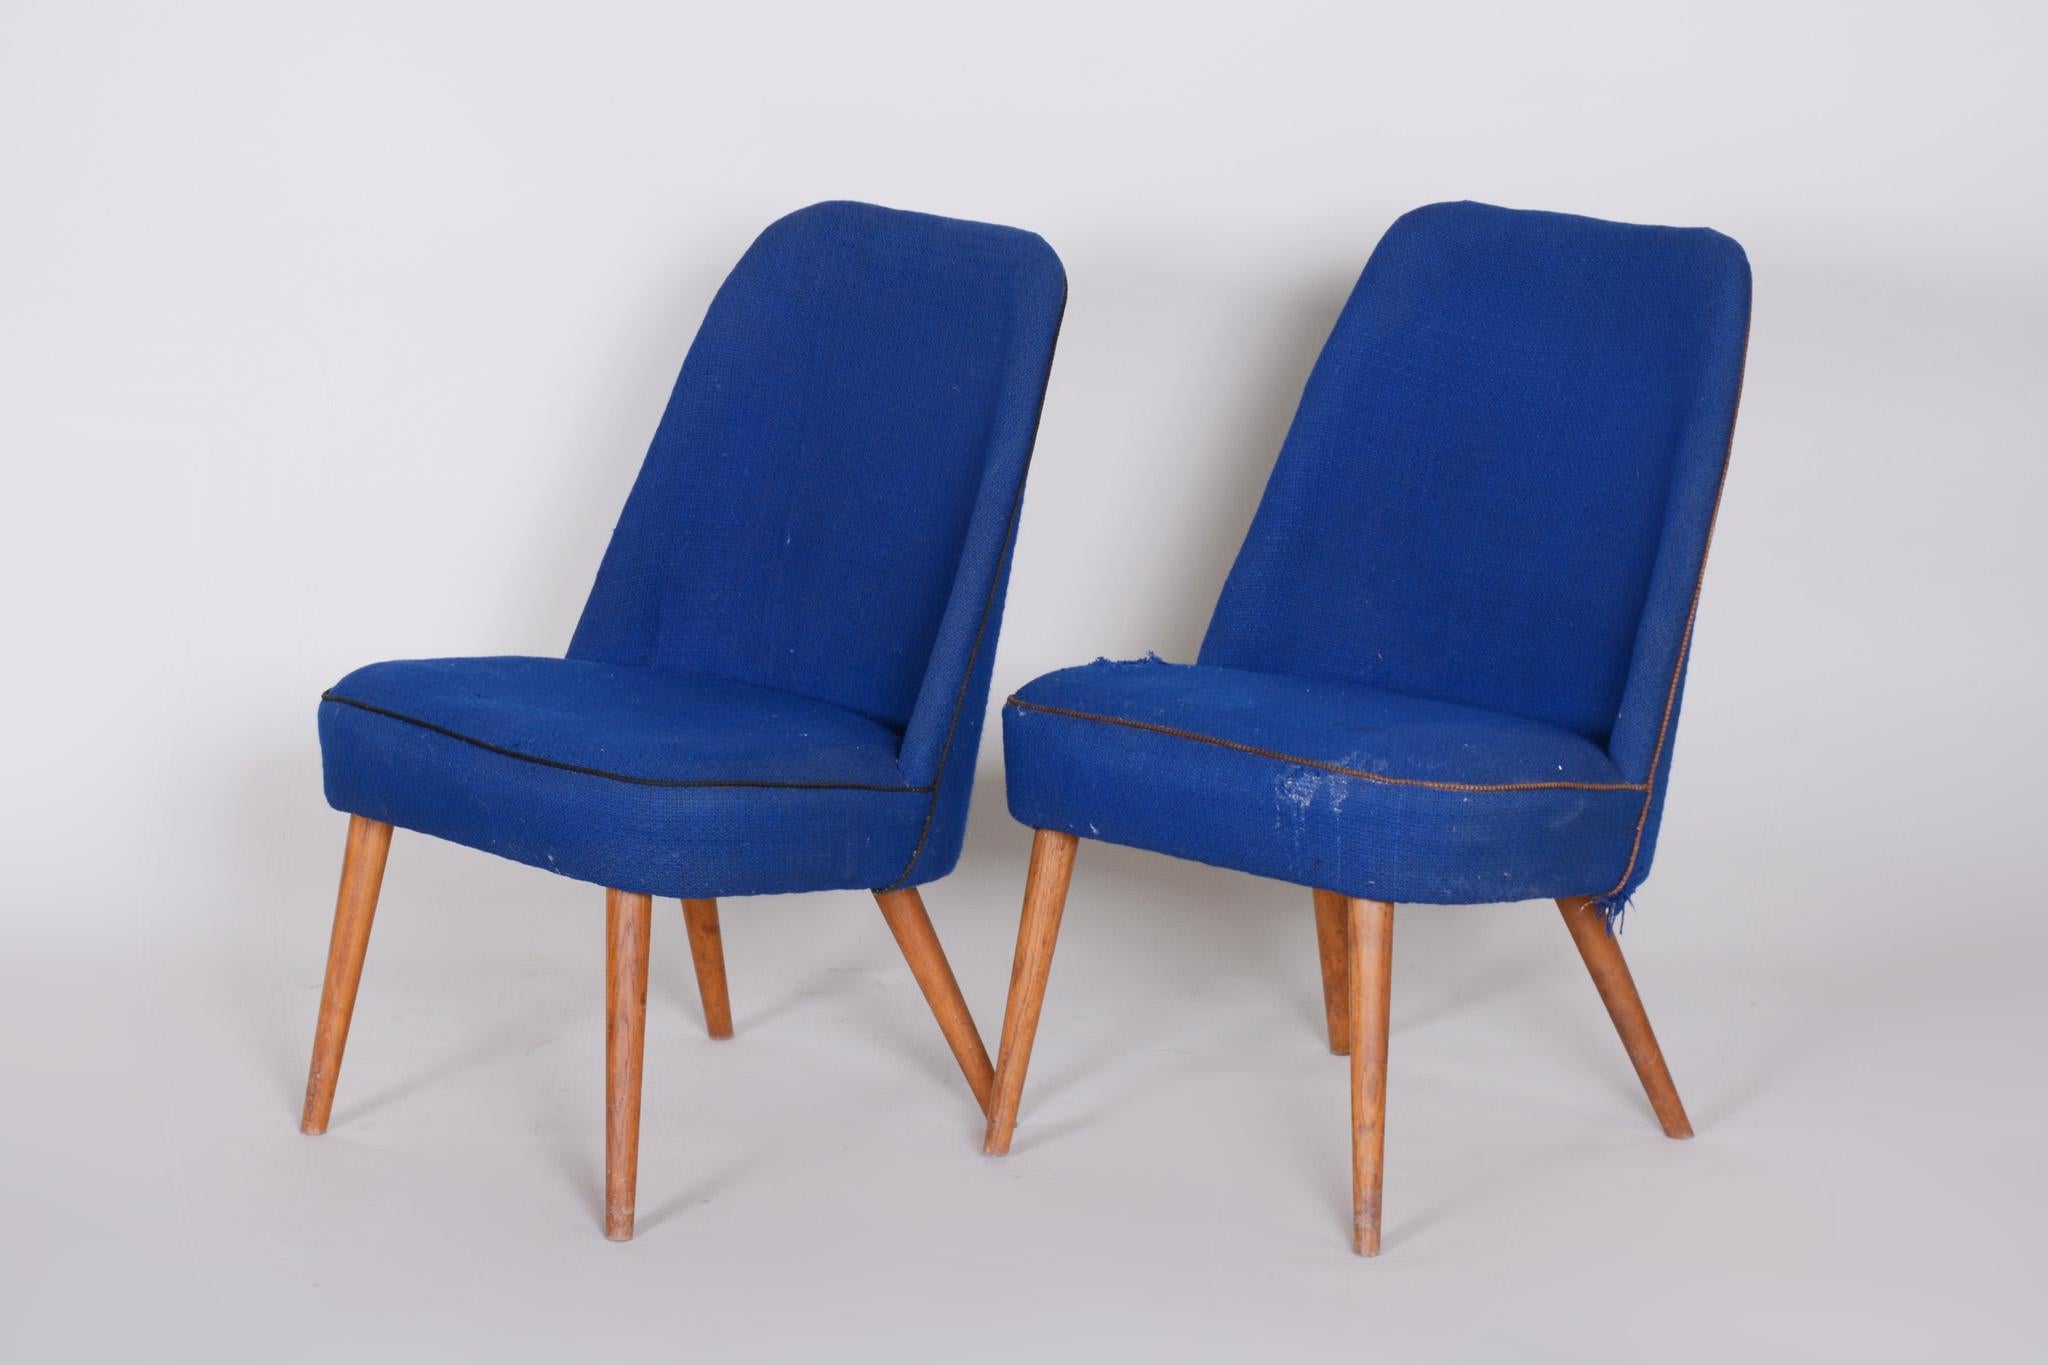 Fabric Set of 2 Blue Mid Century Armchairs, Made in 1950s Czechia. Ash, Original For Sale